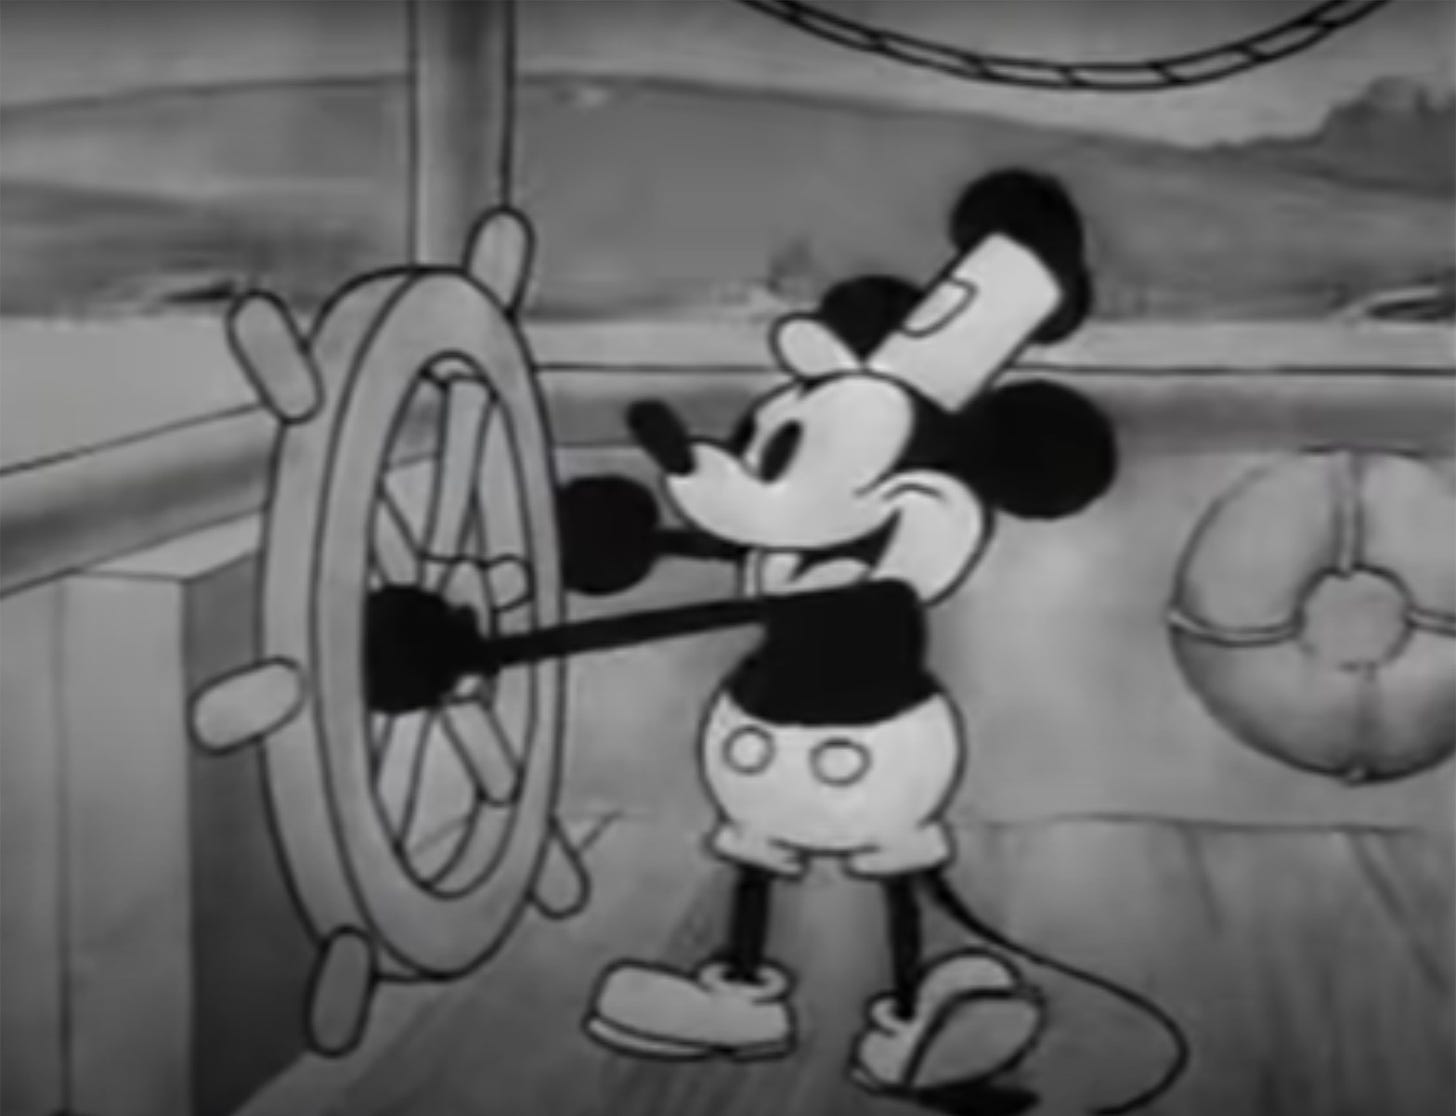 A still of Mickey Mouse from 'Steamboat Willie' showing him at the wheel of a ship.